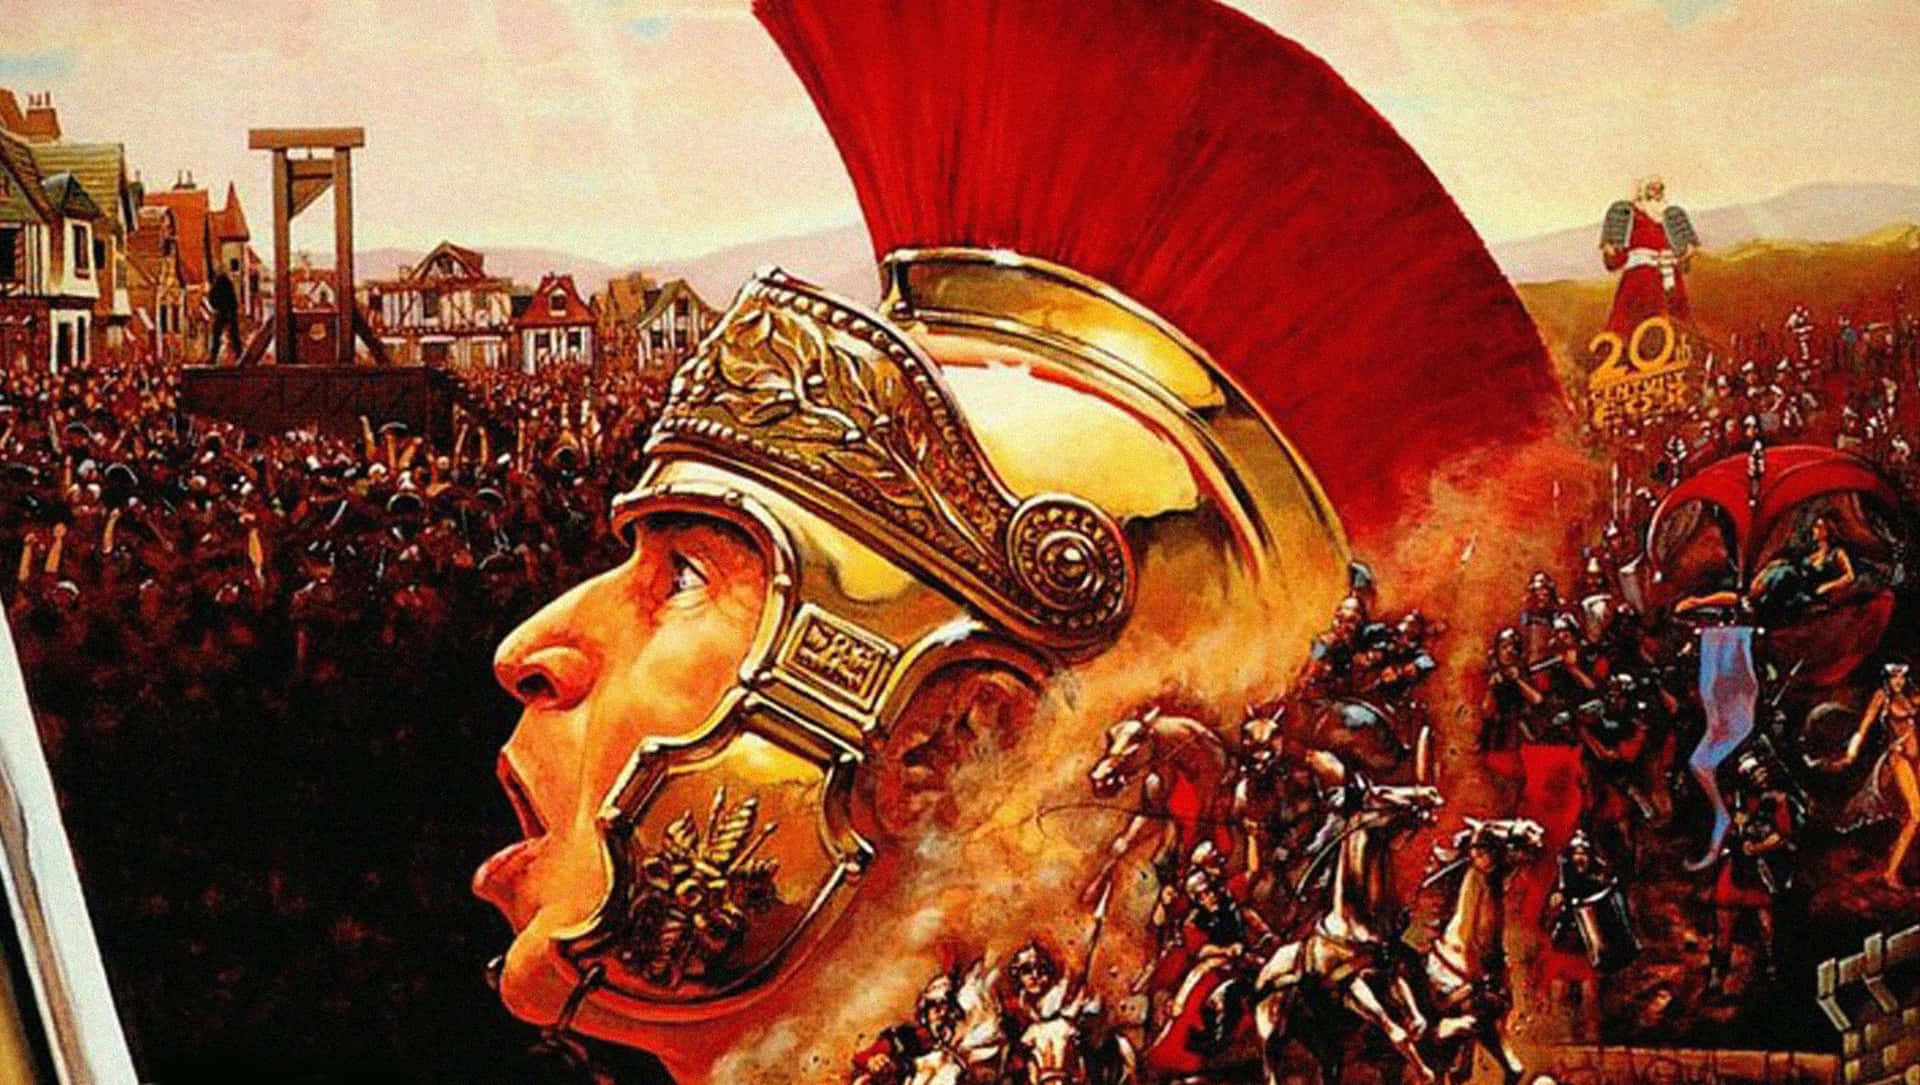 A Painting Of A Roman Soldier With A Helmet